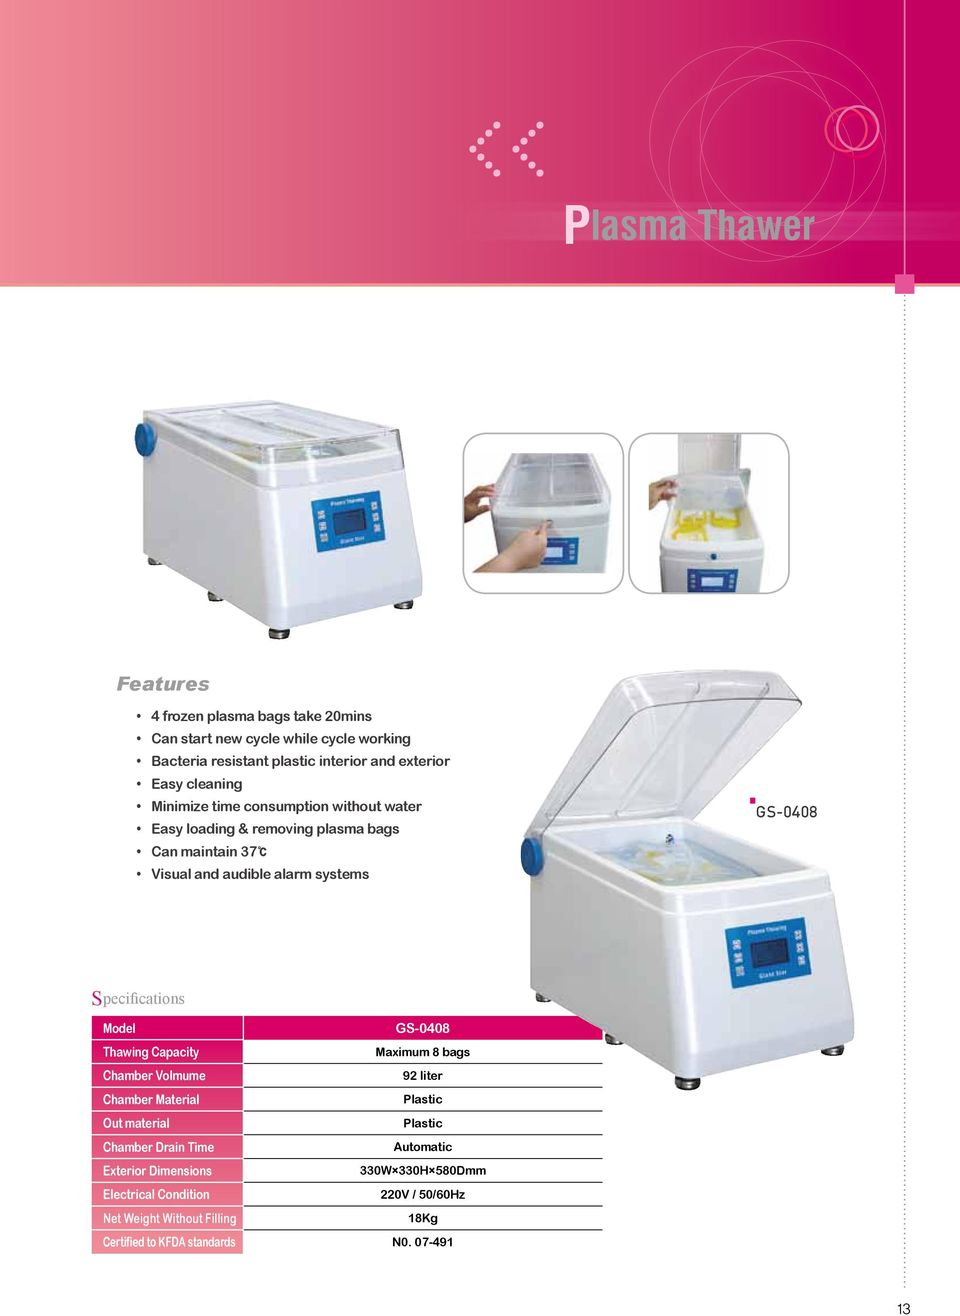 systems GS-0408 Model GS-0408 Thawing Capacity Maximum 8 bags Chamber Volmume 92 liter Chamber Plastic Out material Plastic Chamber Drain Time